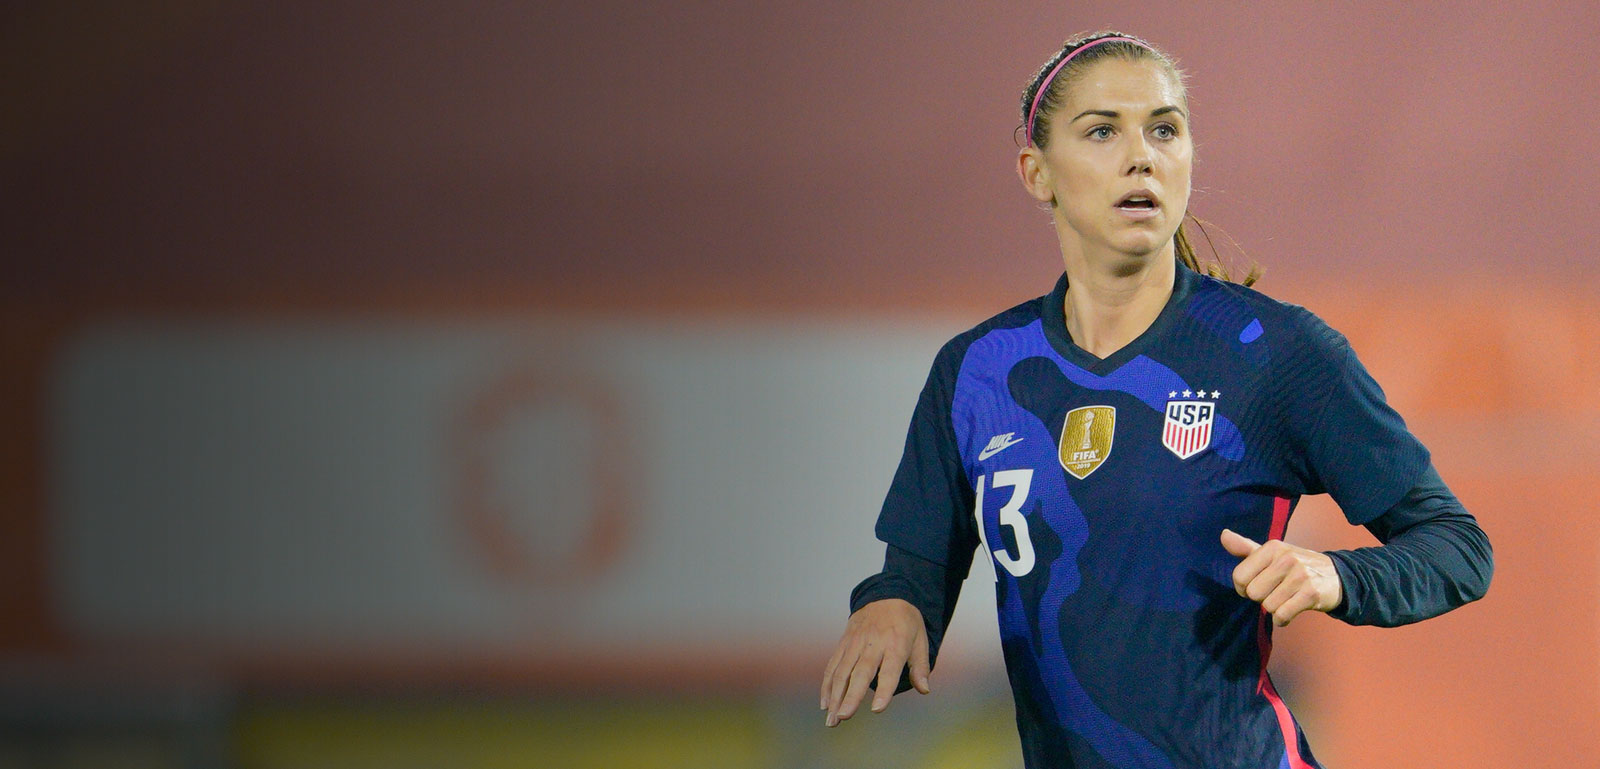 Image of Alex Morgan, a professional soccer player for the Orlando Pride and the US Women's National Team.